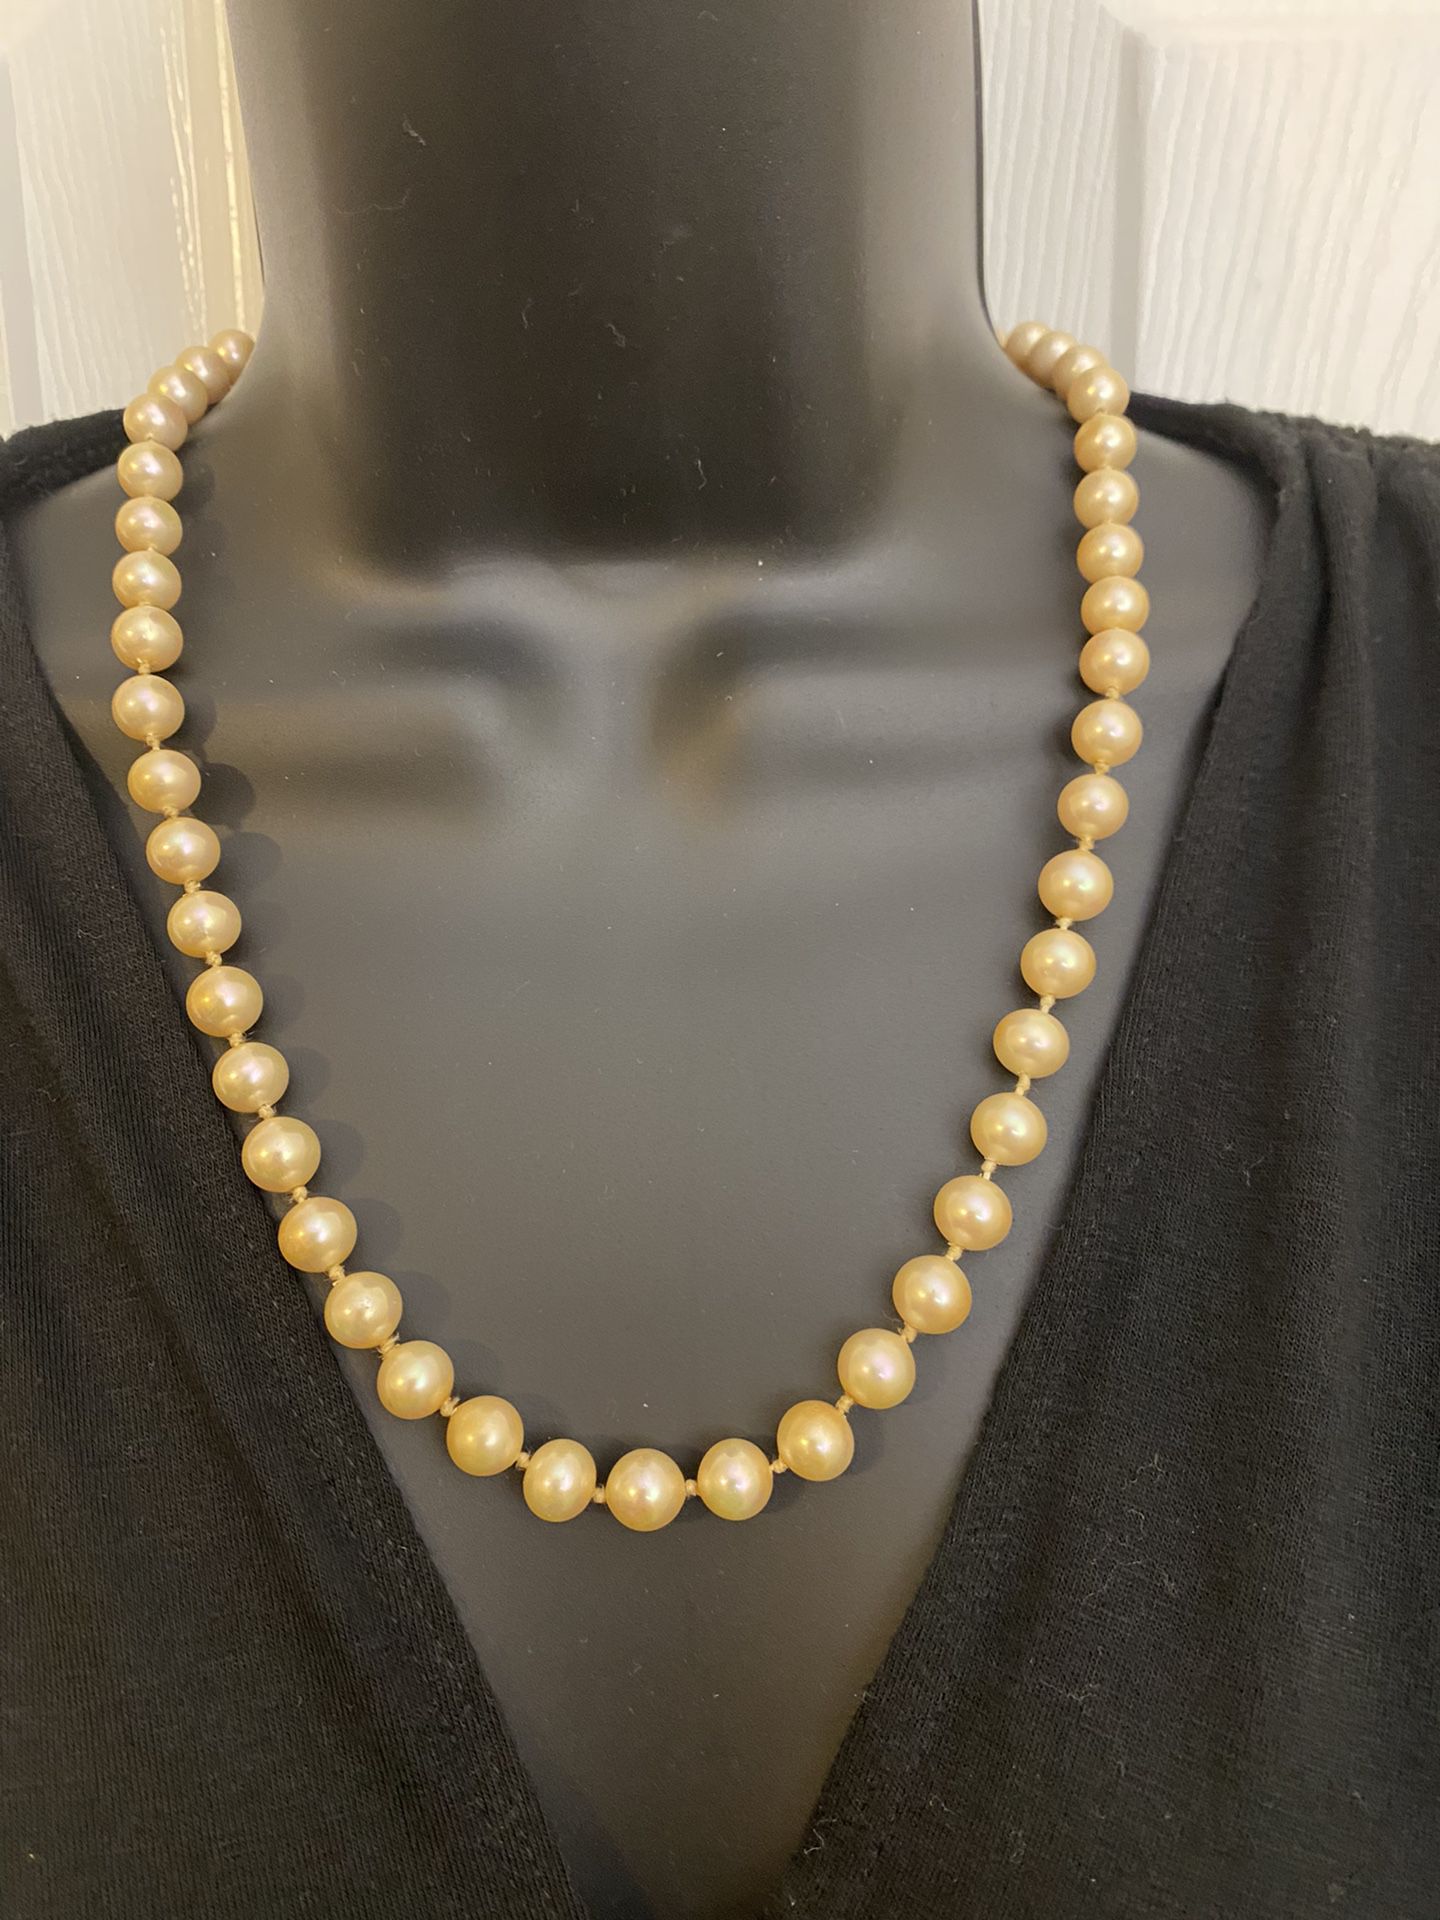 Vintage Cream Pearl Necklace 21.5” end to end 1cm pearls Rhinestone Silver Clasp